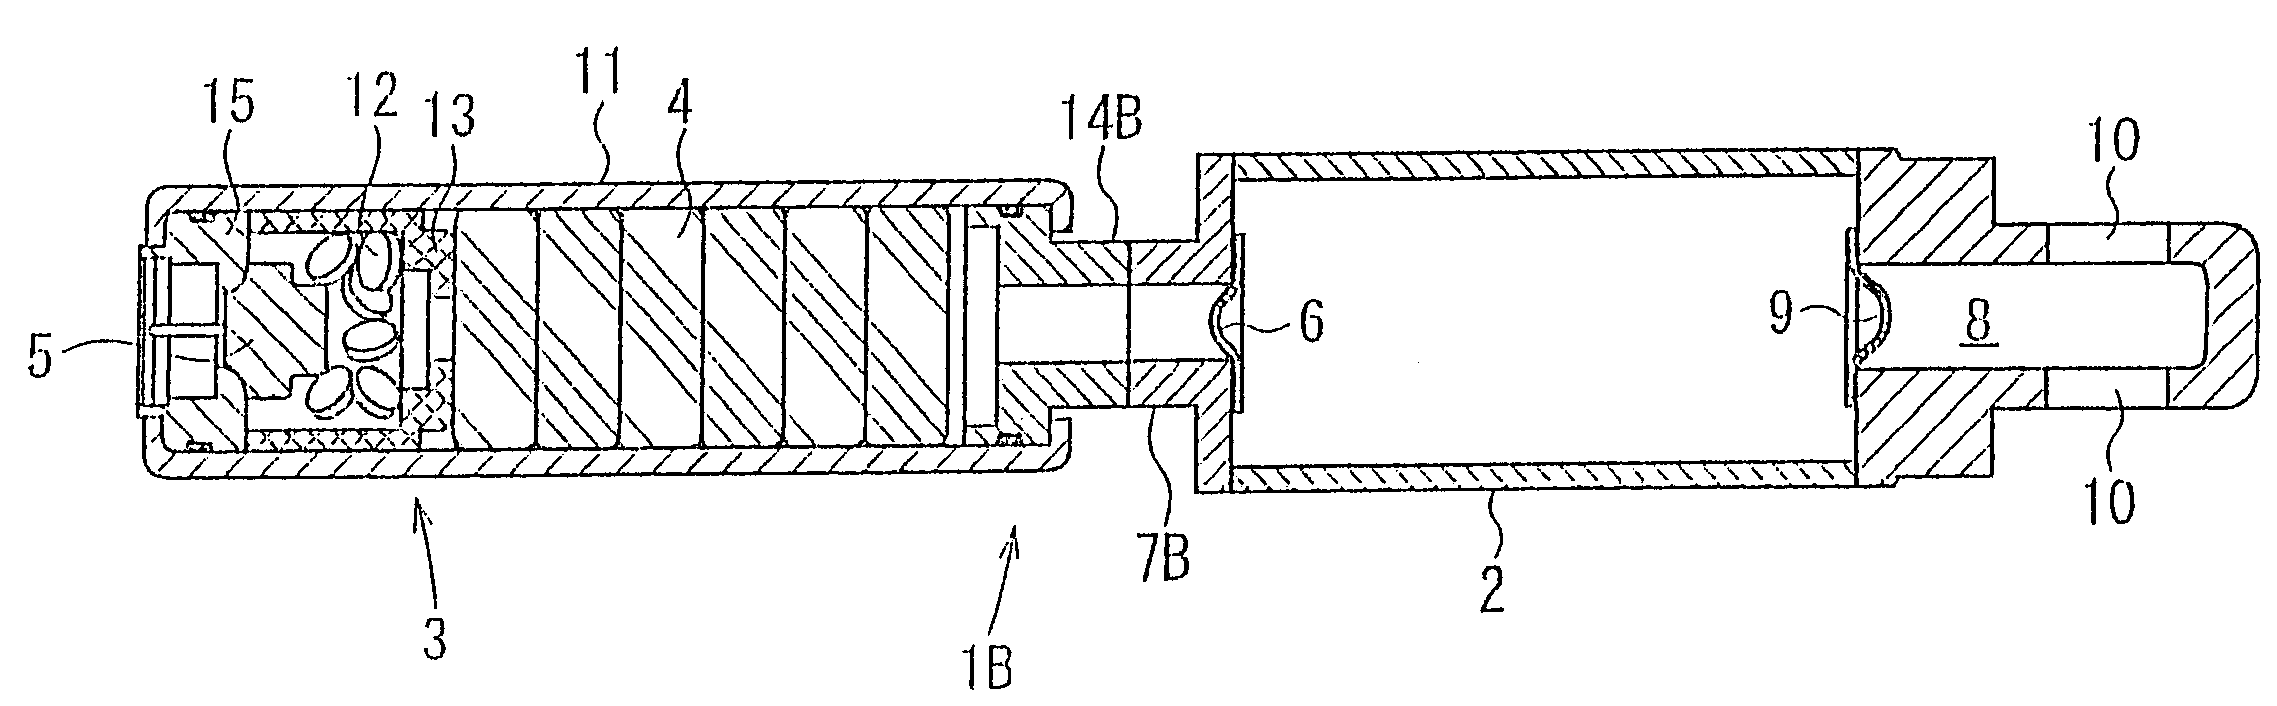 Inflator and airbag apparatus